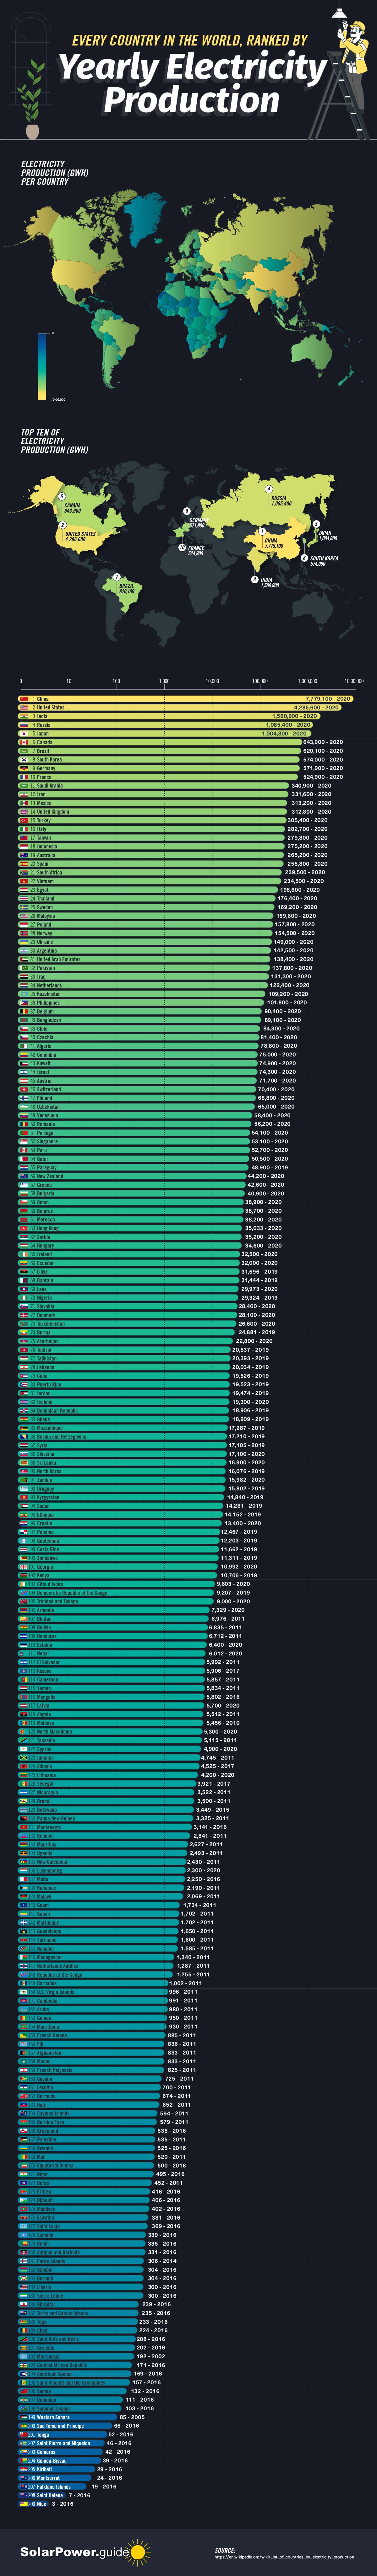 Every Country Ranked by Yearly Electricity Production